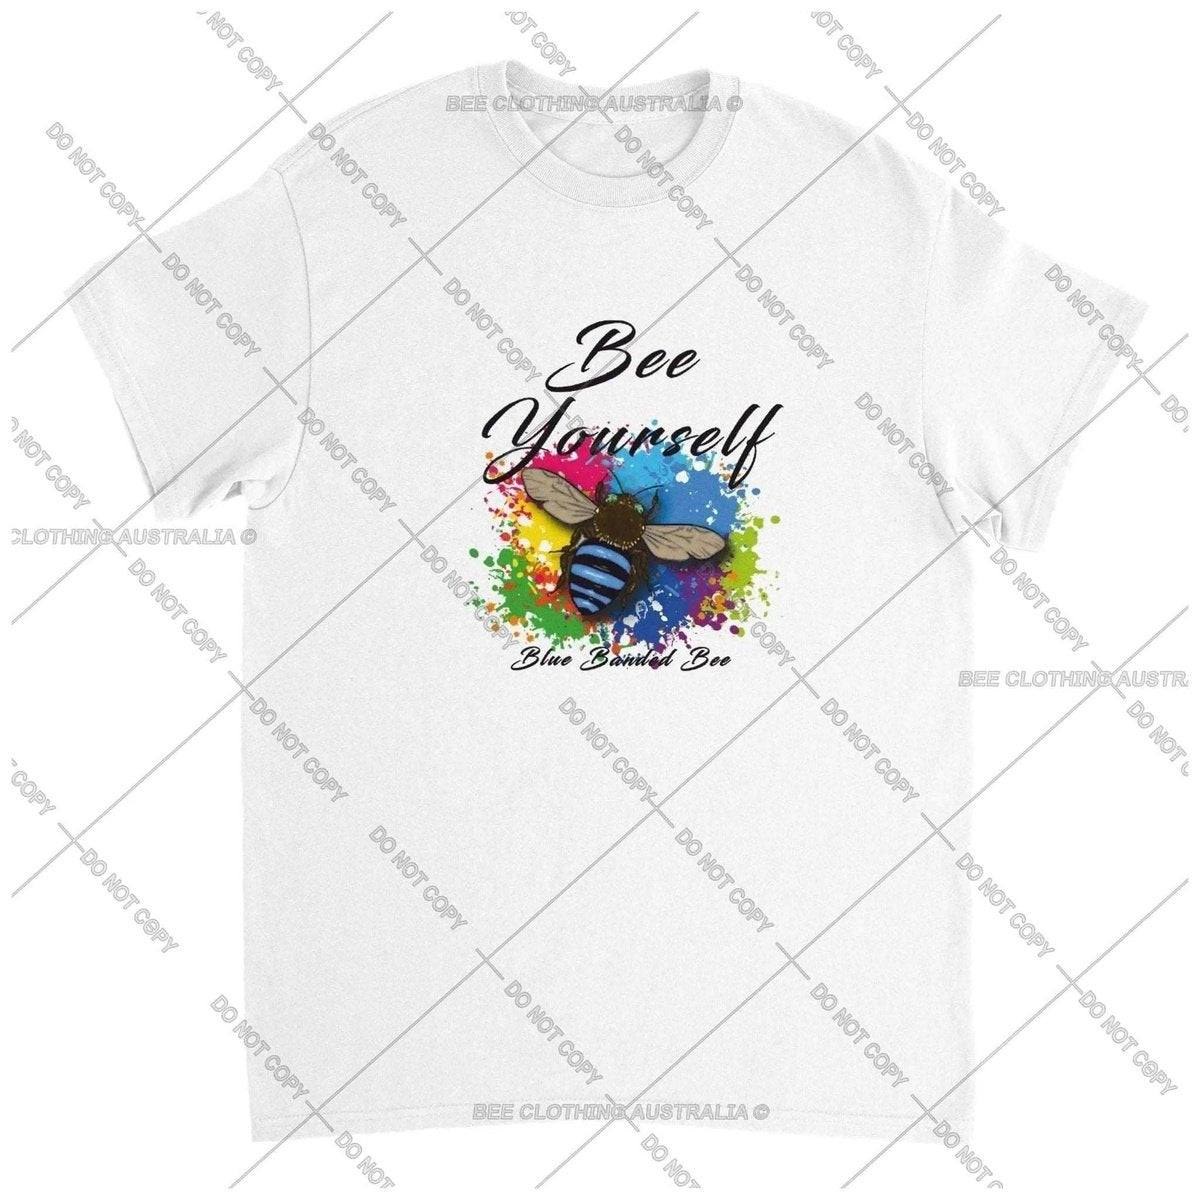 Bee Yourself - Blue Banded Bee - Native Bee T-Shirt Unisex Australia Online Color White / S